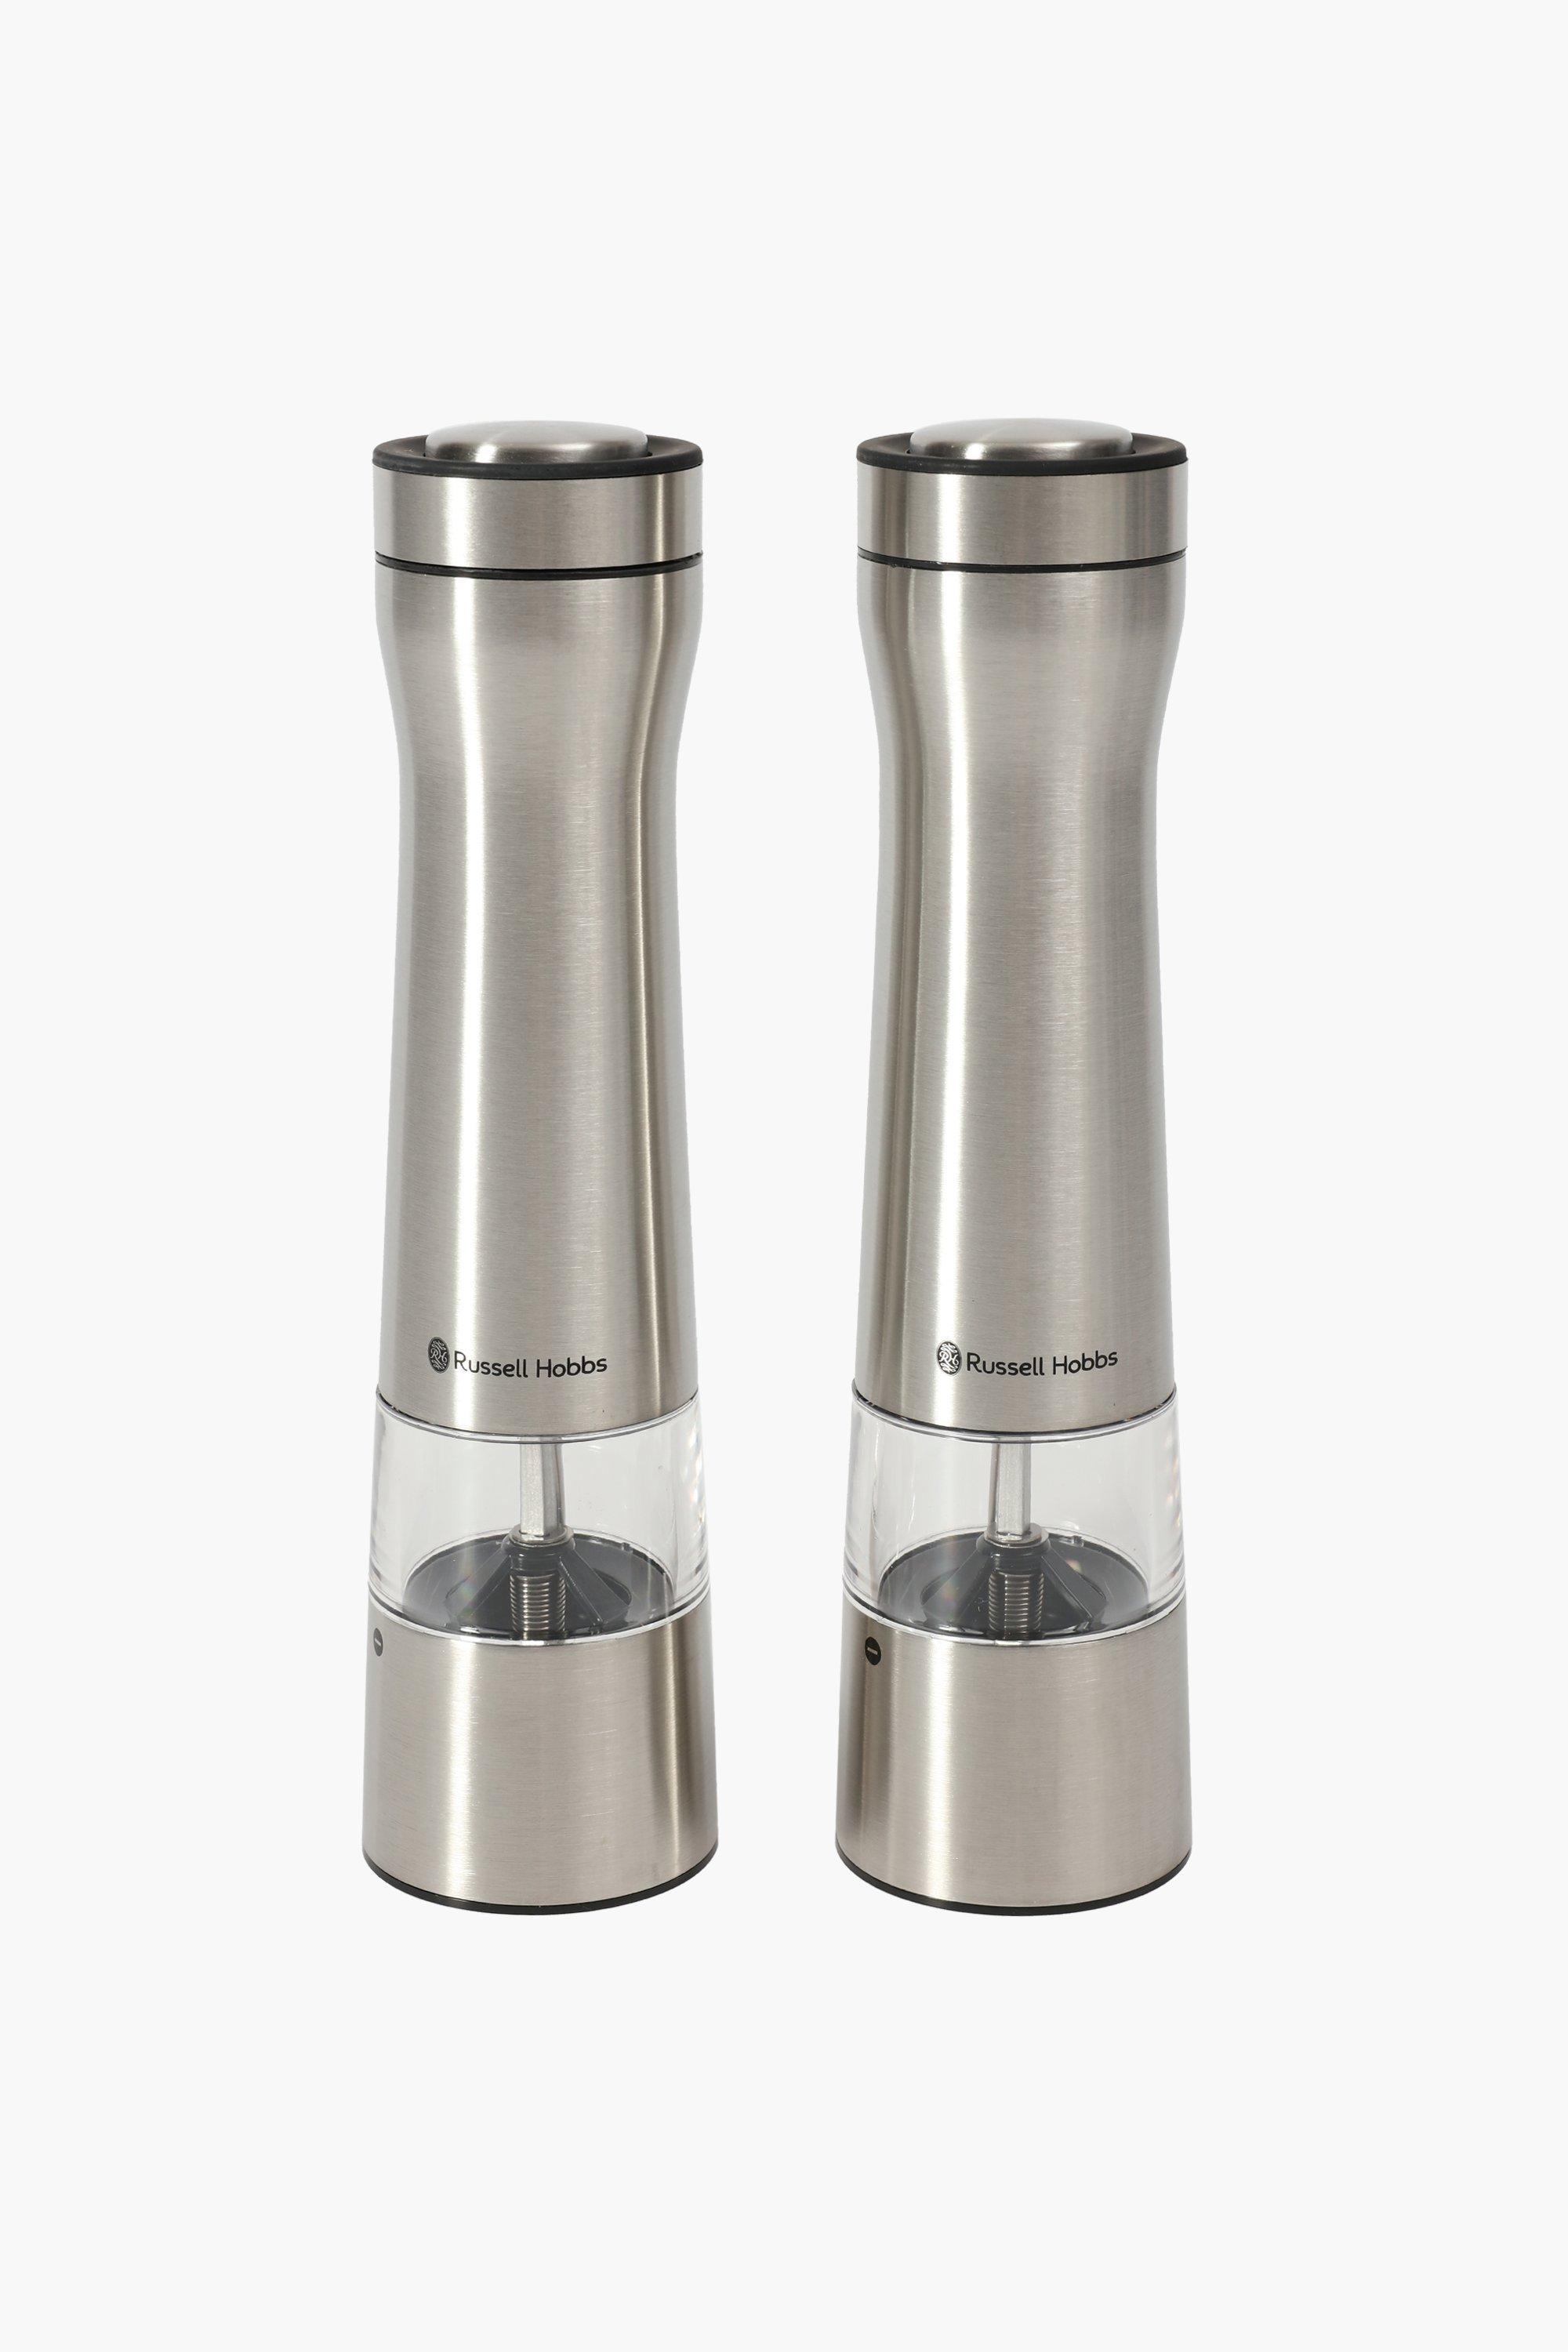 Russell Hobbs Electric Salt and Pepper Mills Grinders Battery Operated Set